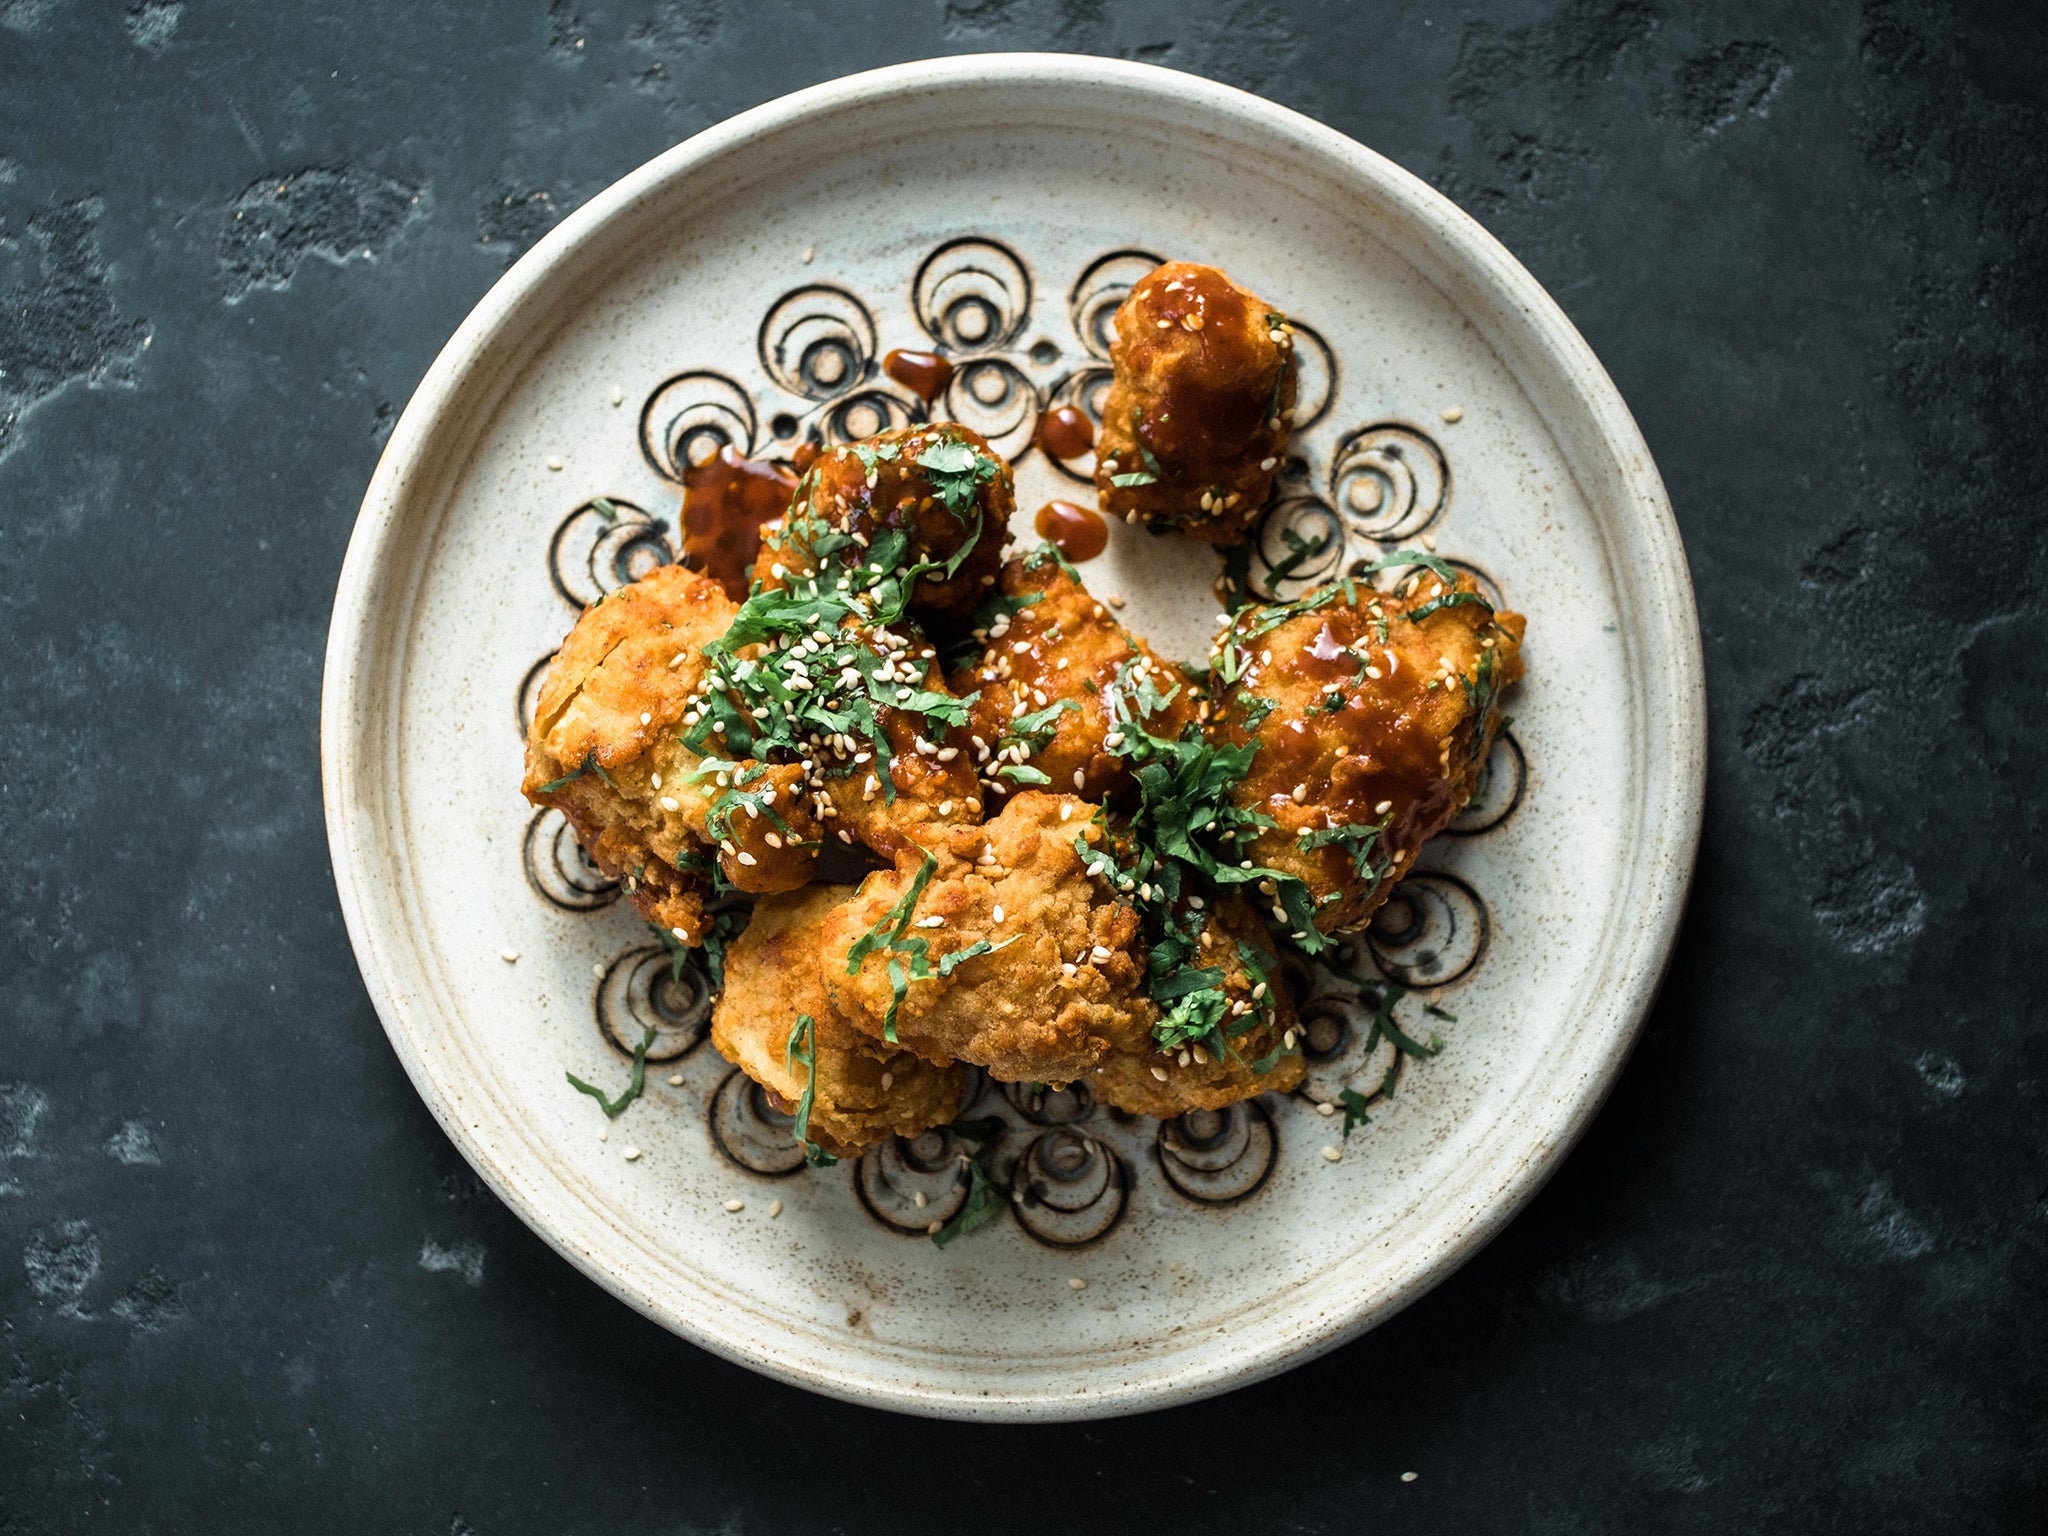 Forget fried chicken, this celeriac is all you will need to satisfy your KFC cravings